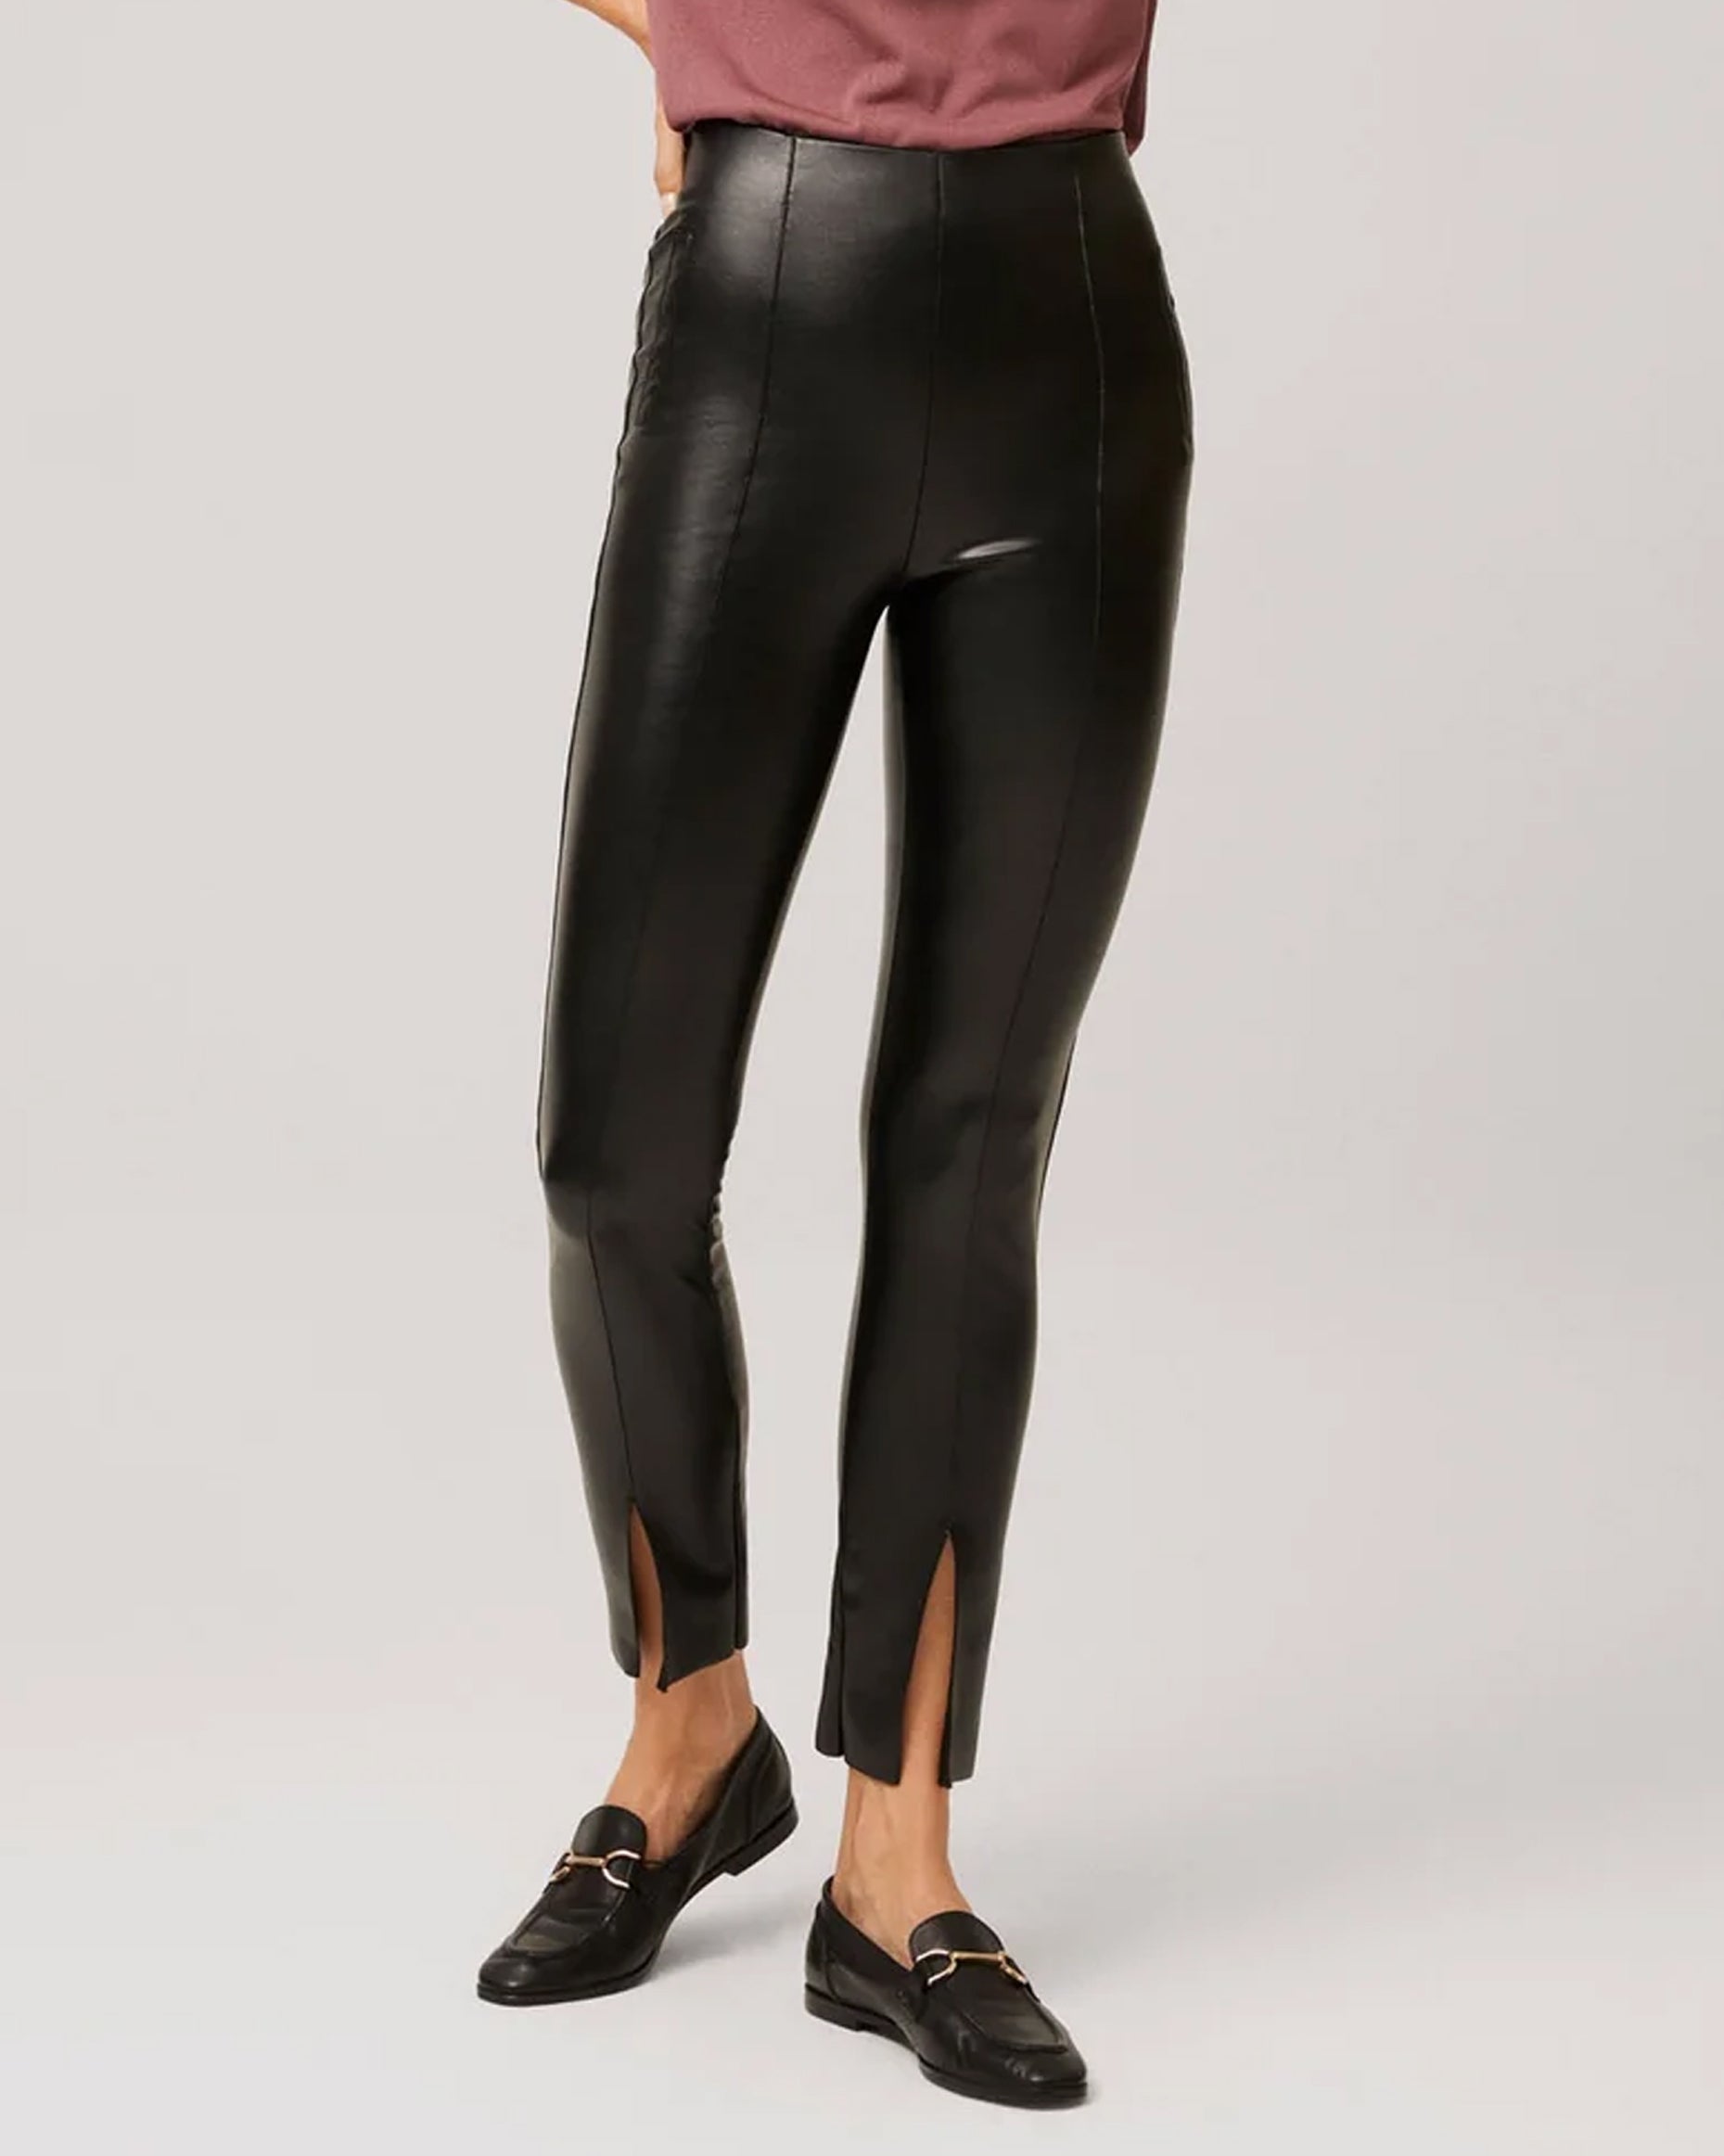 Ysabel Mora 70295 Faux Leather Slit Leggings - Tight fit faux leather thermal black coloured leggings with a warm plush fleece lining, faux side pocket stitching, centre seam down the front of the leg with a slit opening at the cuff, worn with black sneakers.